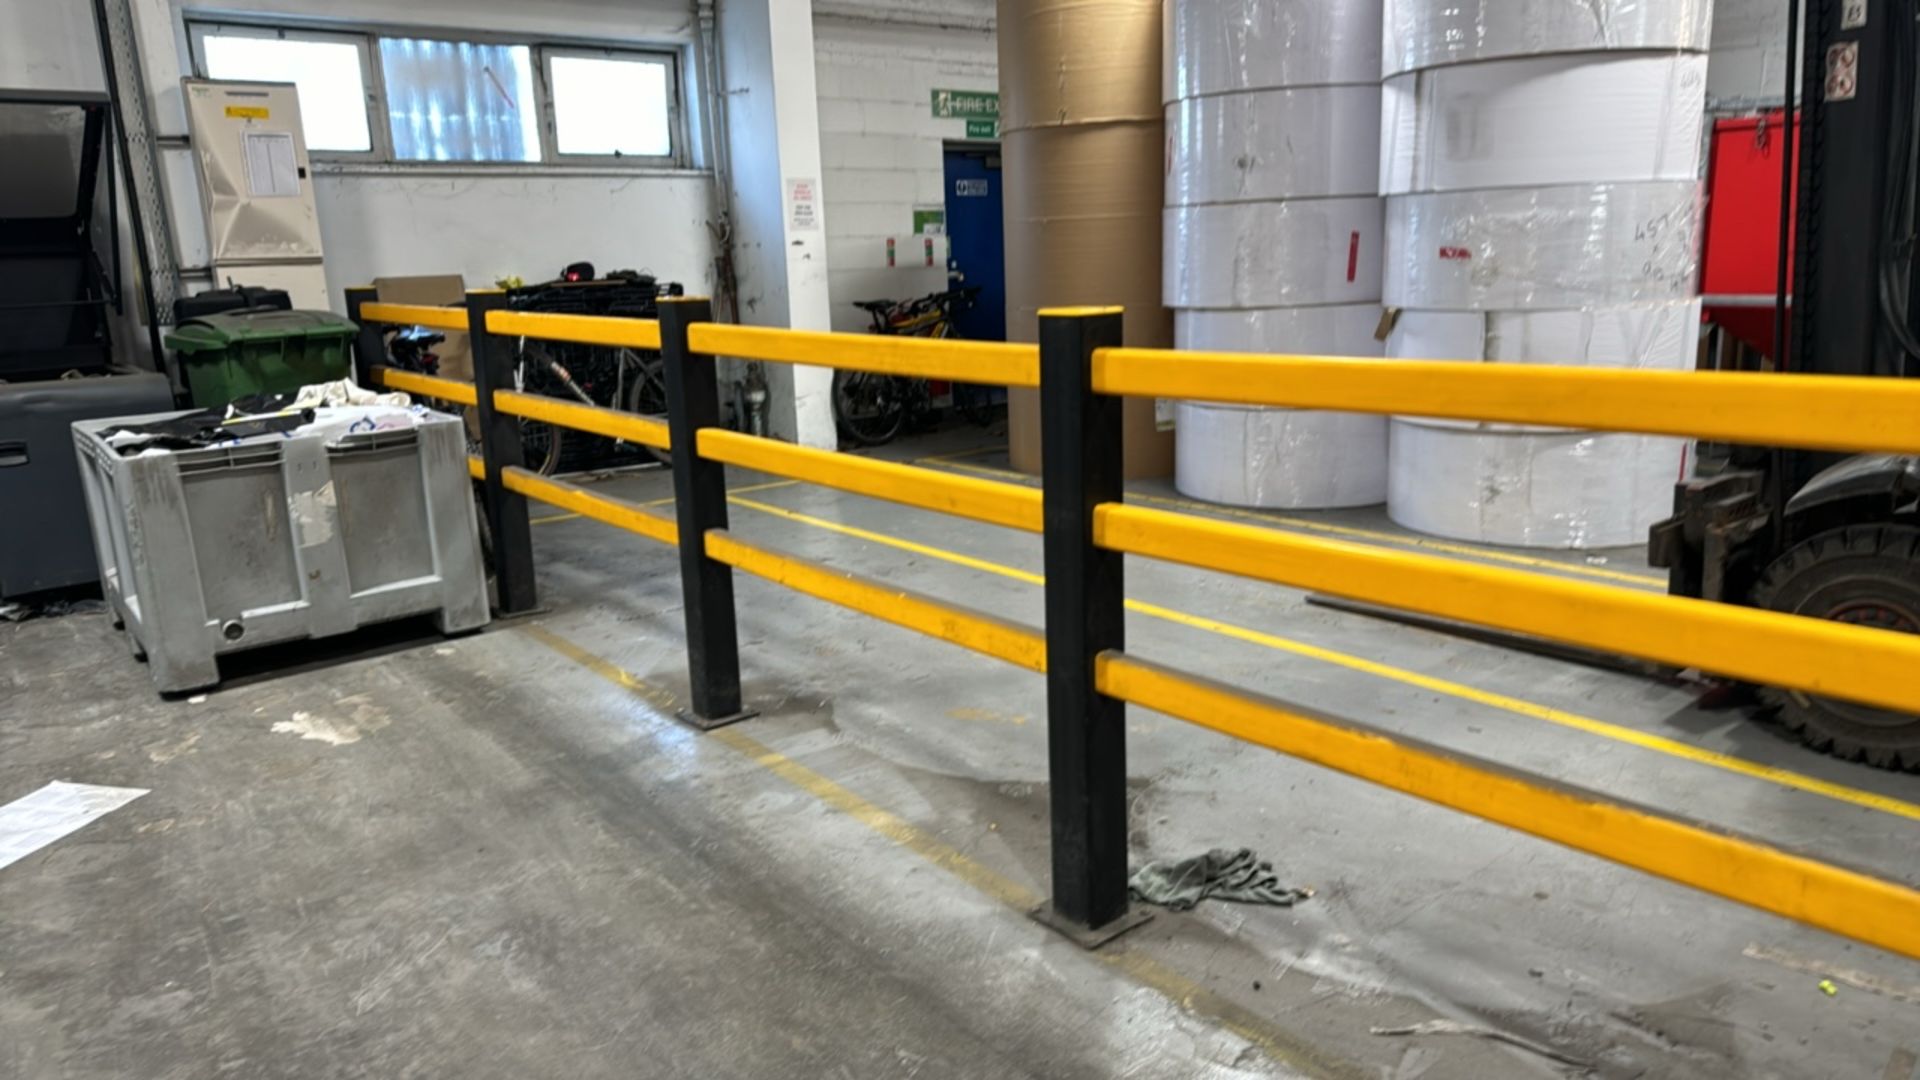 7 Metres of A-Safe Rectangular Safety Barriers - Image 4 of 7